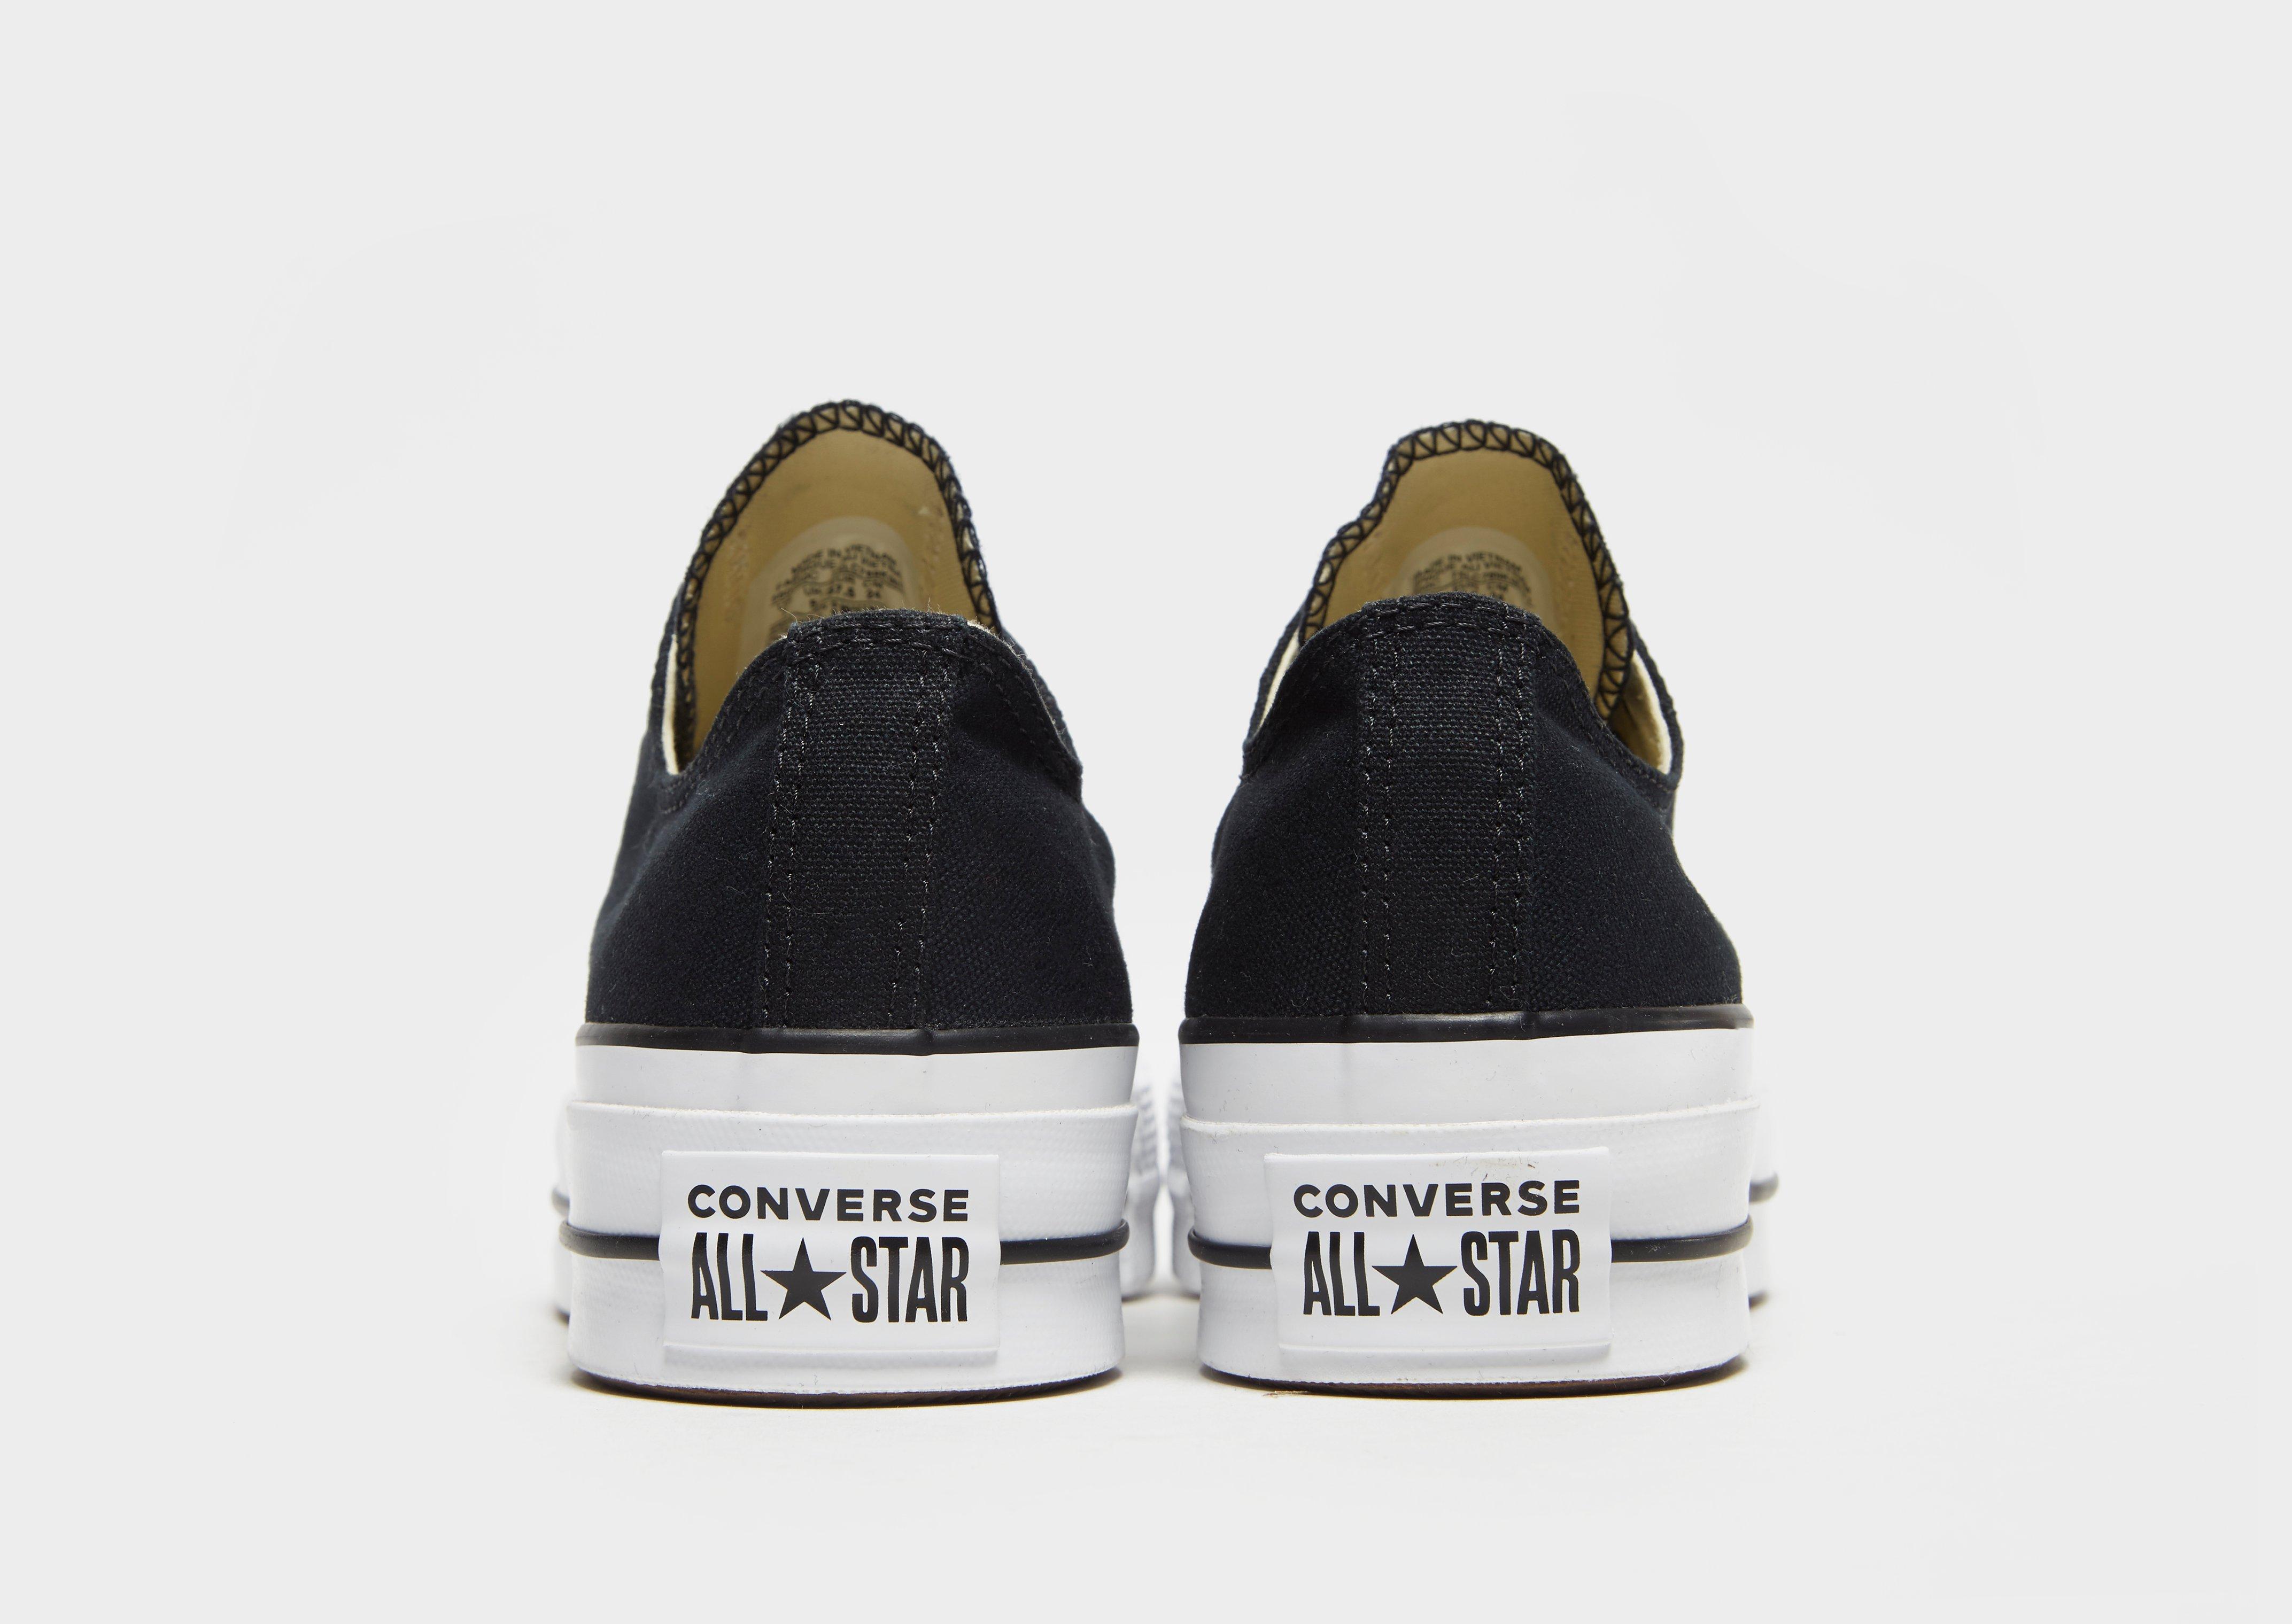 chuck taylor low top